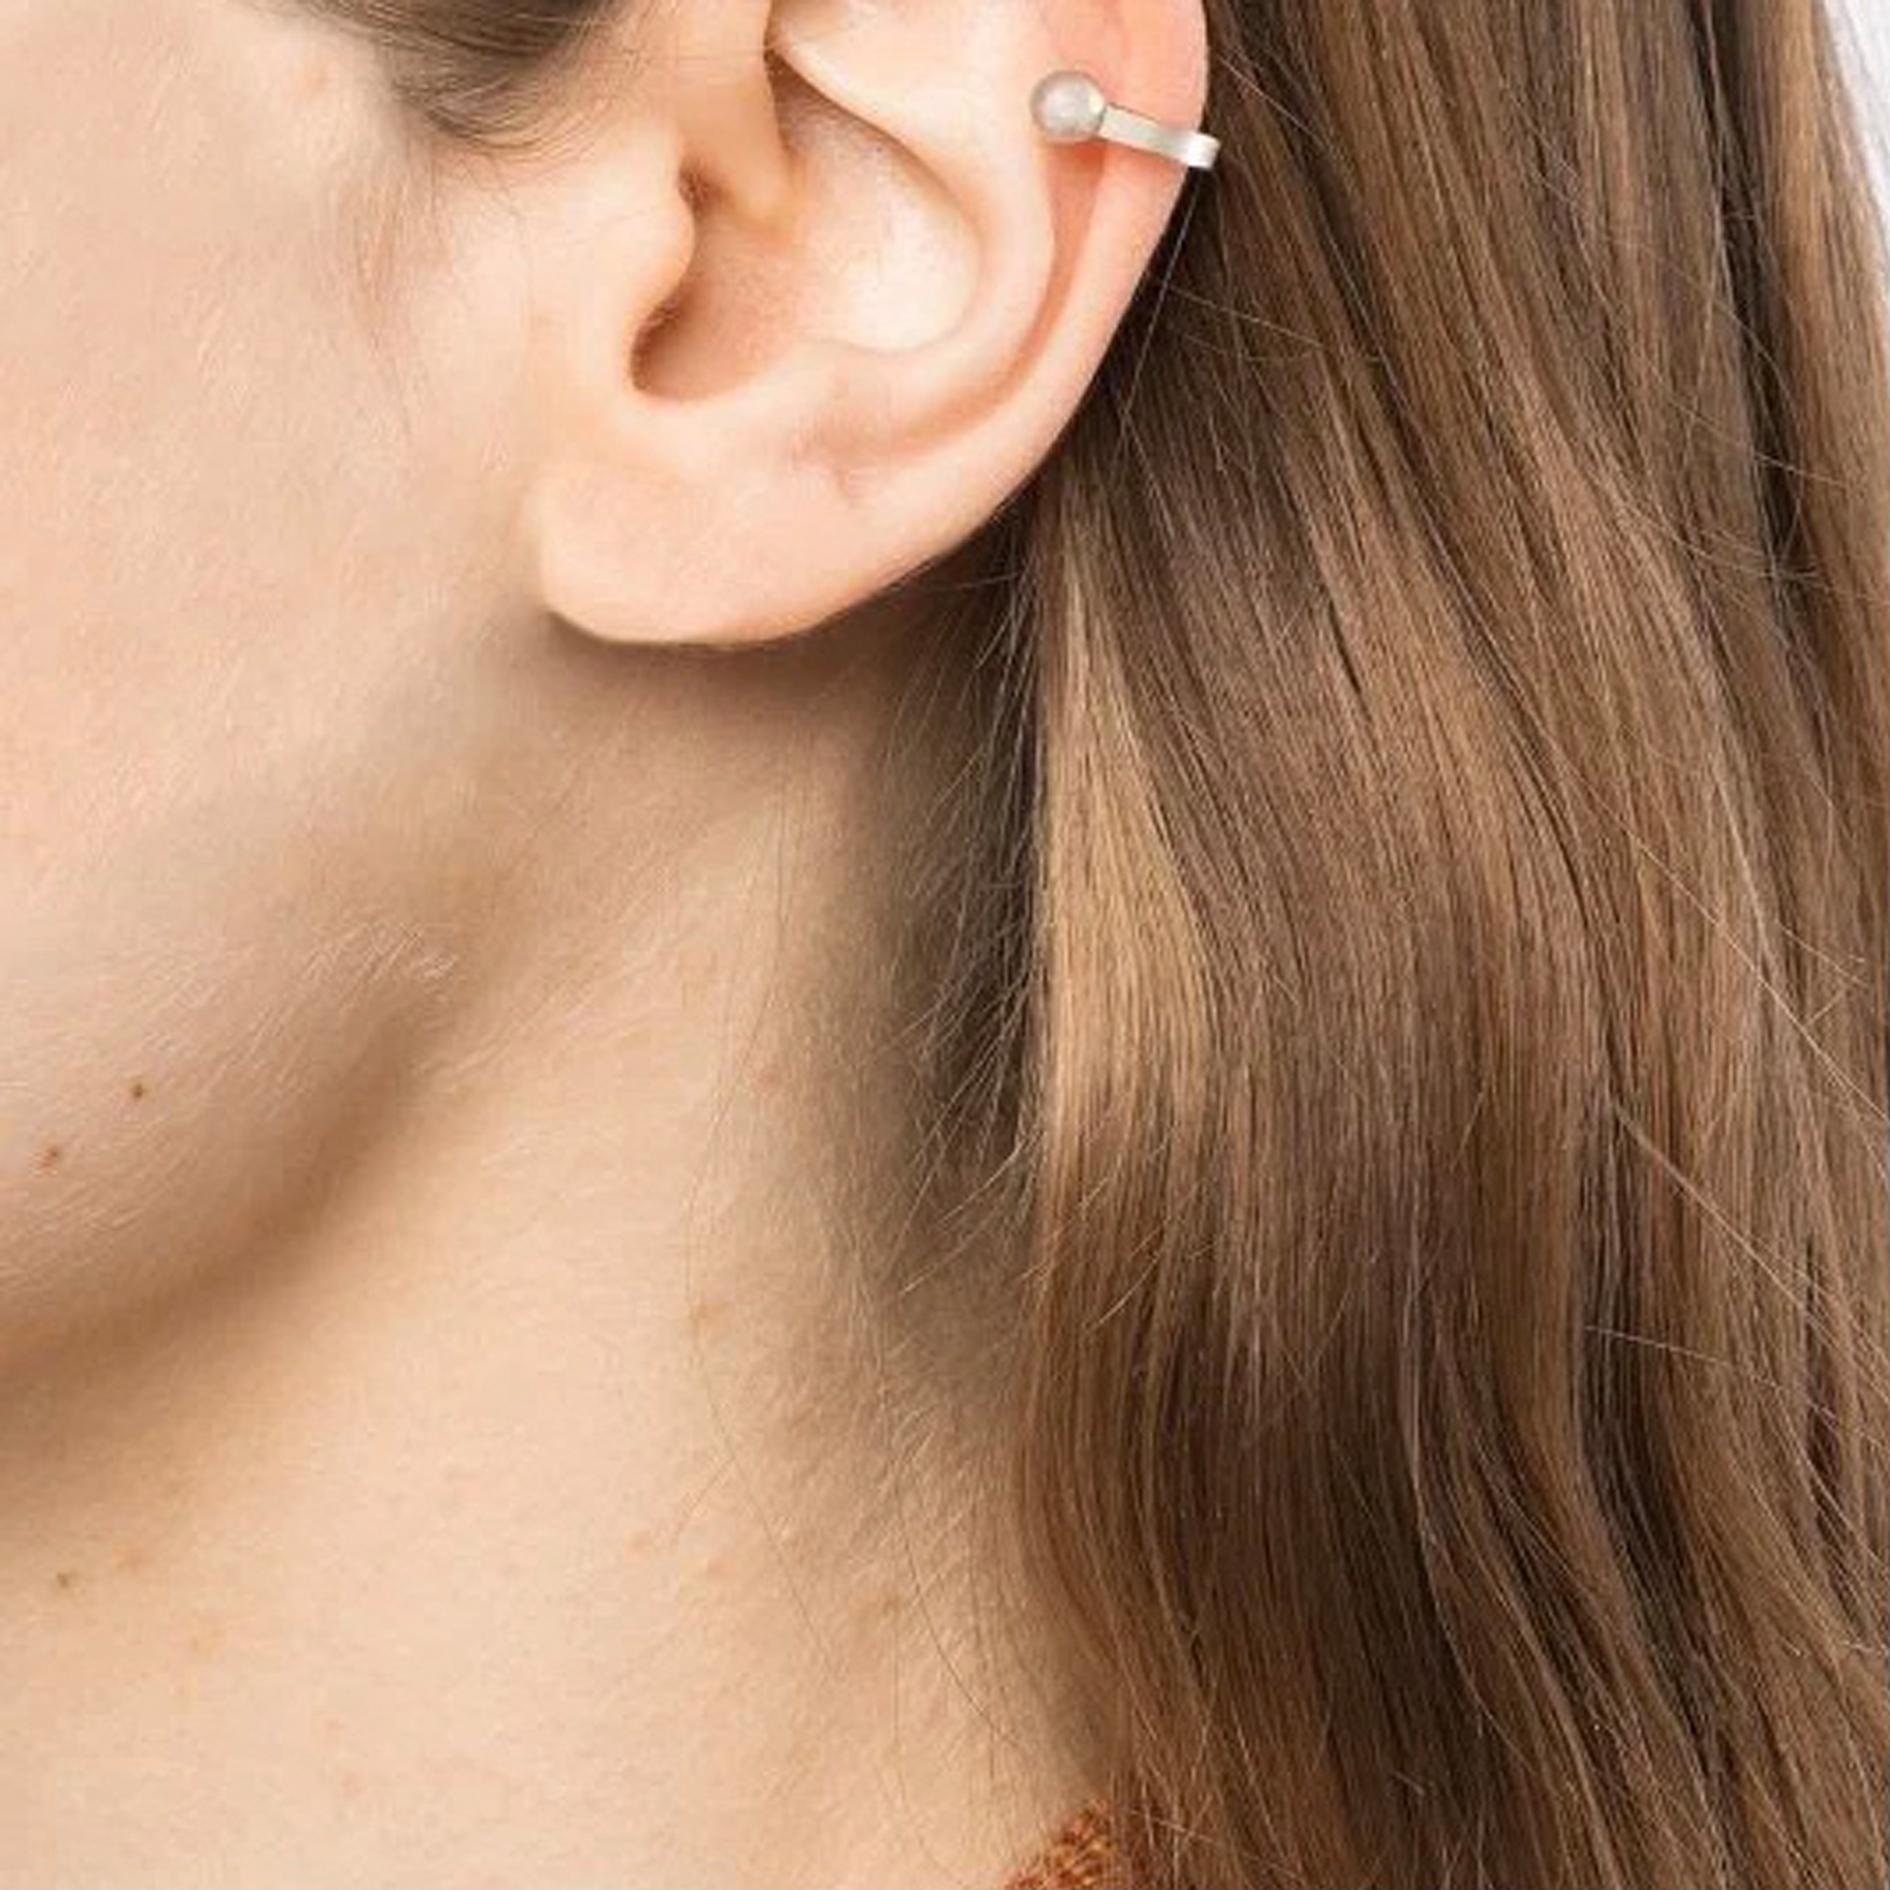 Unfinishing Line collection exudes minimalism and precision with its smooth lines and angles. Detail with a curved structure and cut out details. Square Line Ear cuff is perfect for day to night wear due to the simplistic neat design which can be